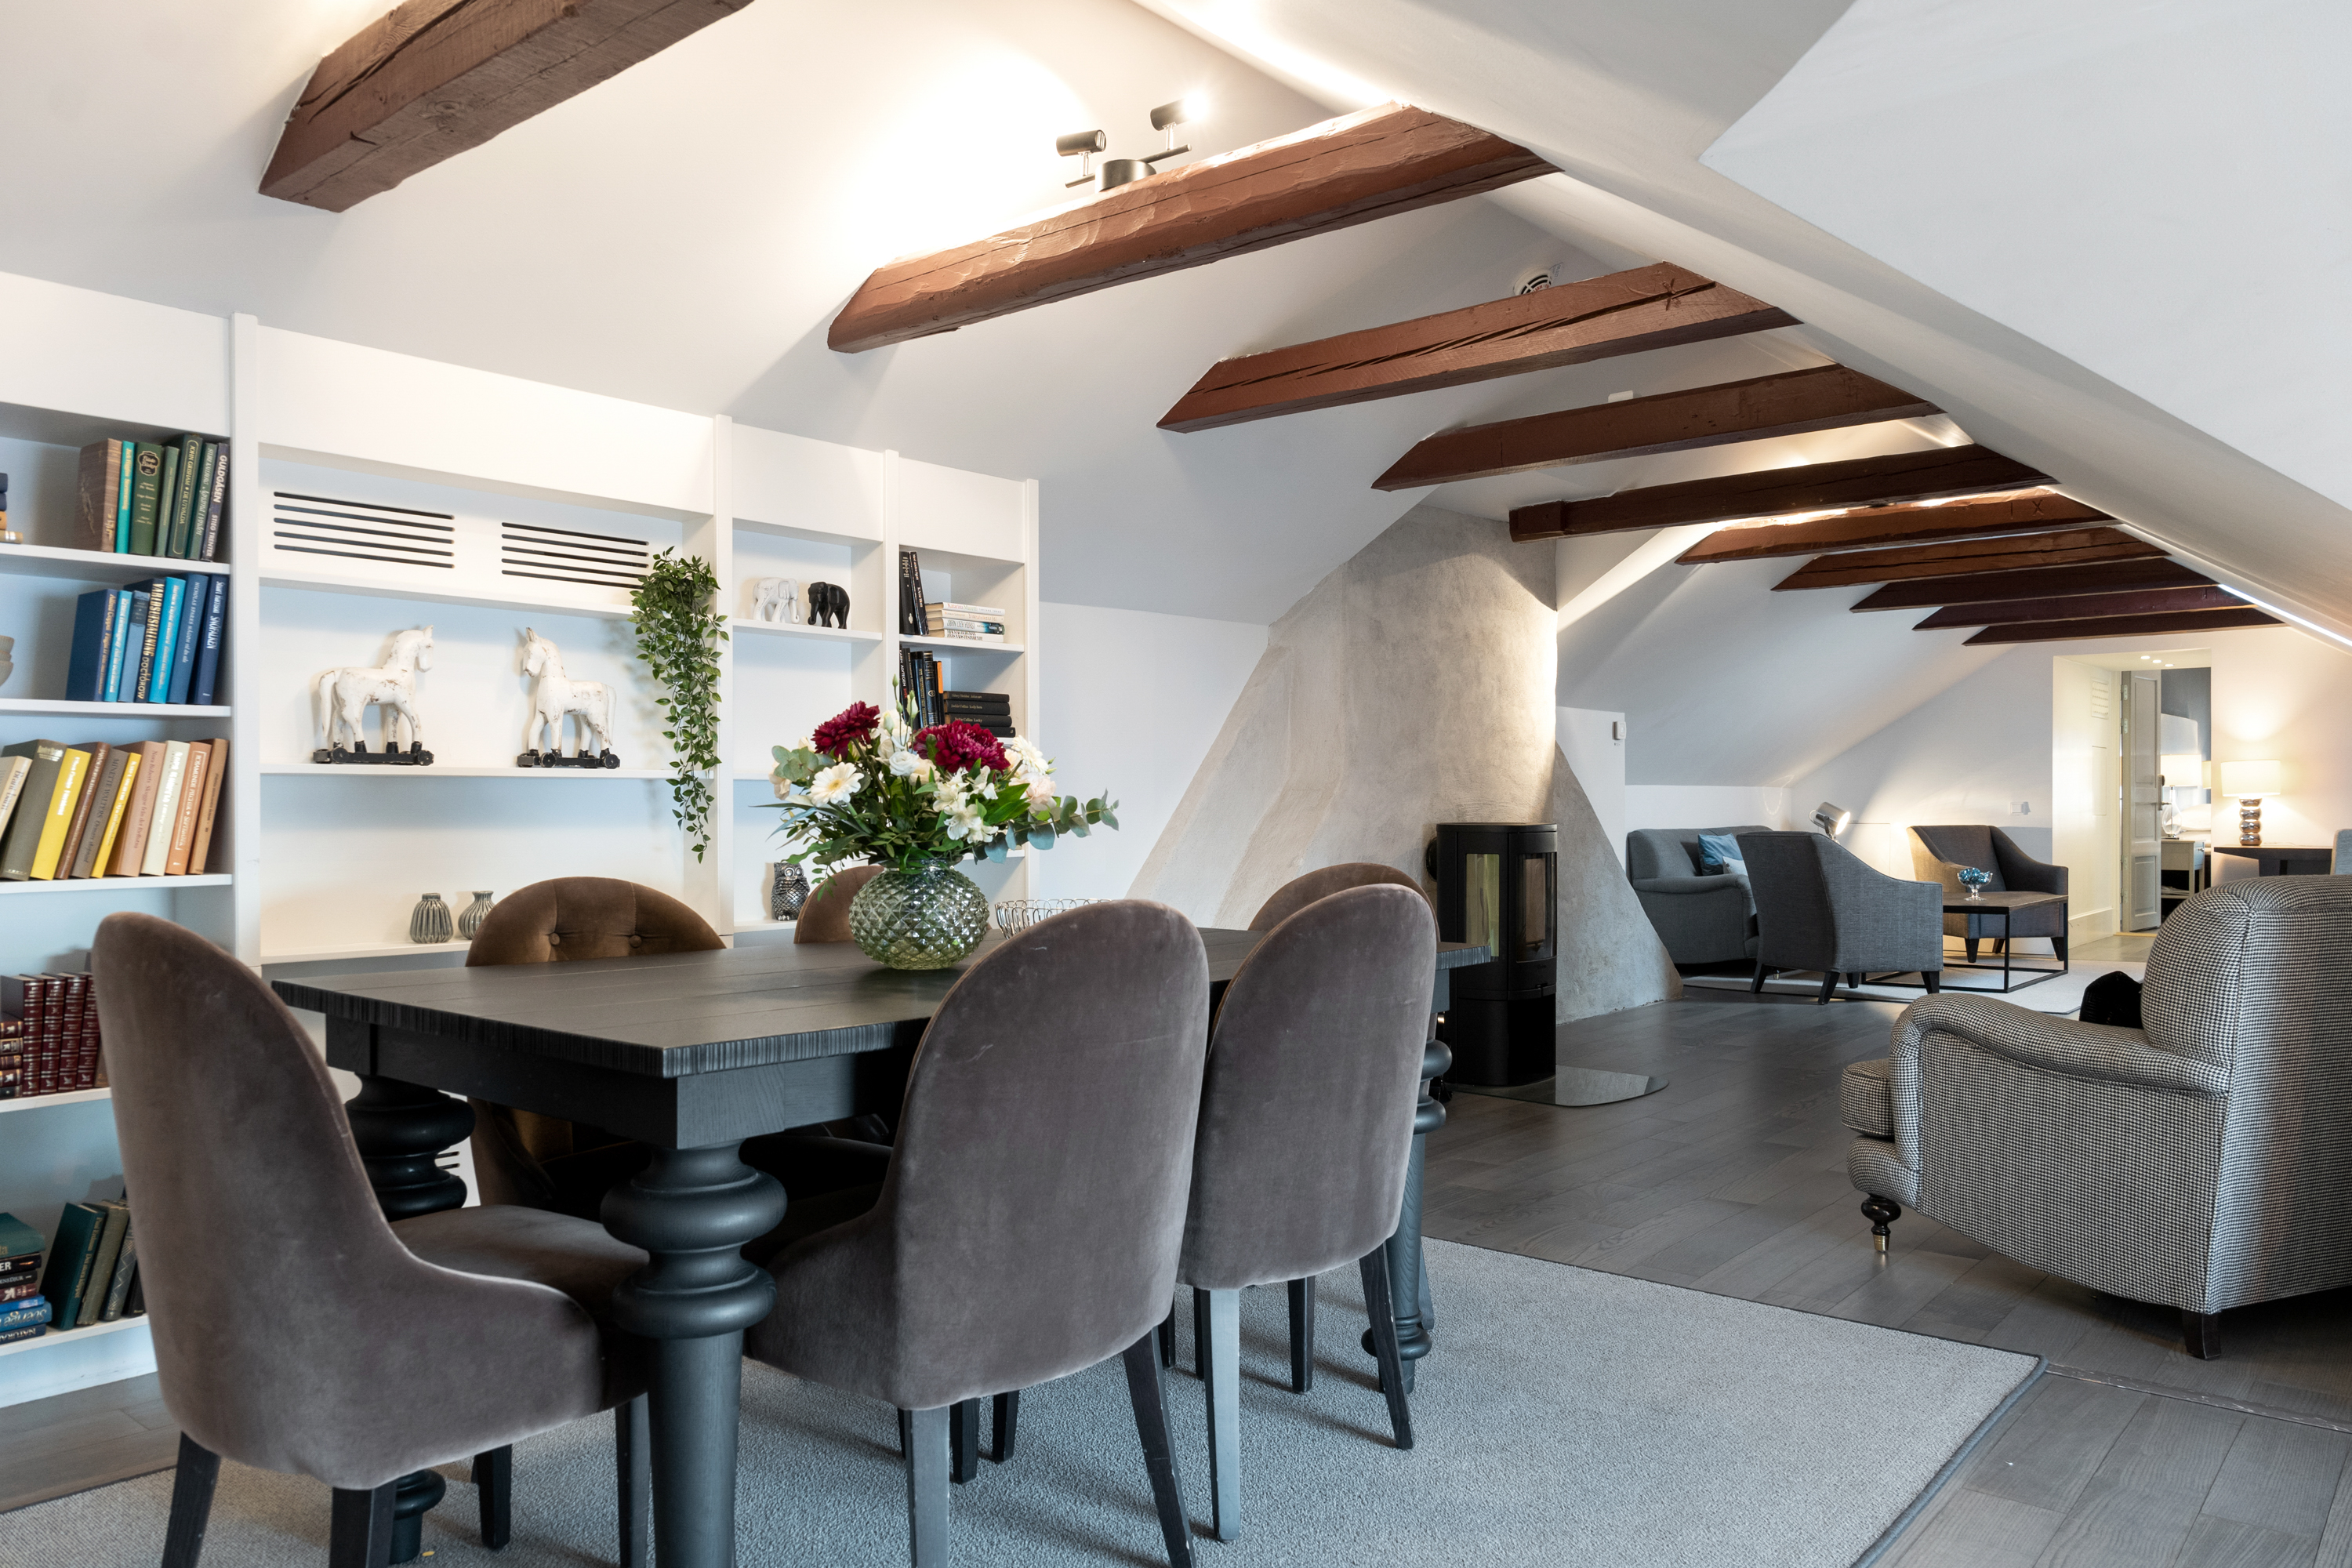 Bright suite with dining table, bookcase and wooden beams in the ceiling